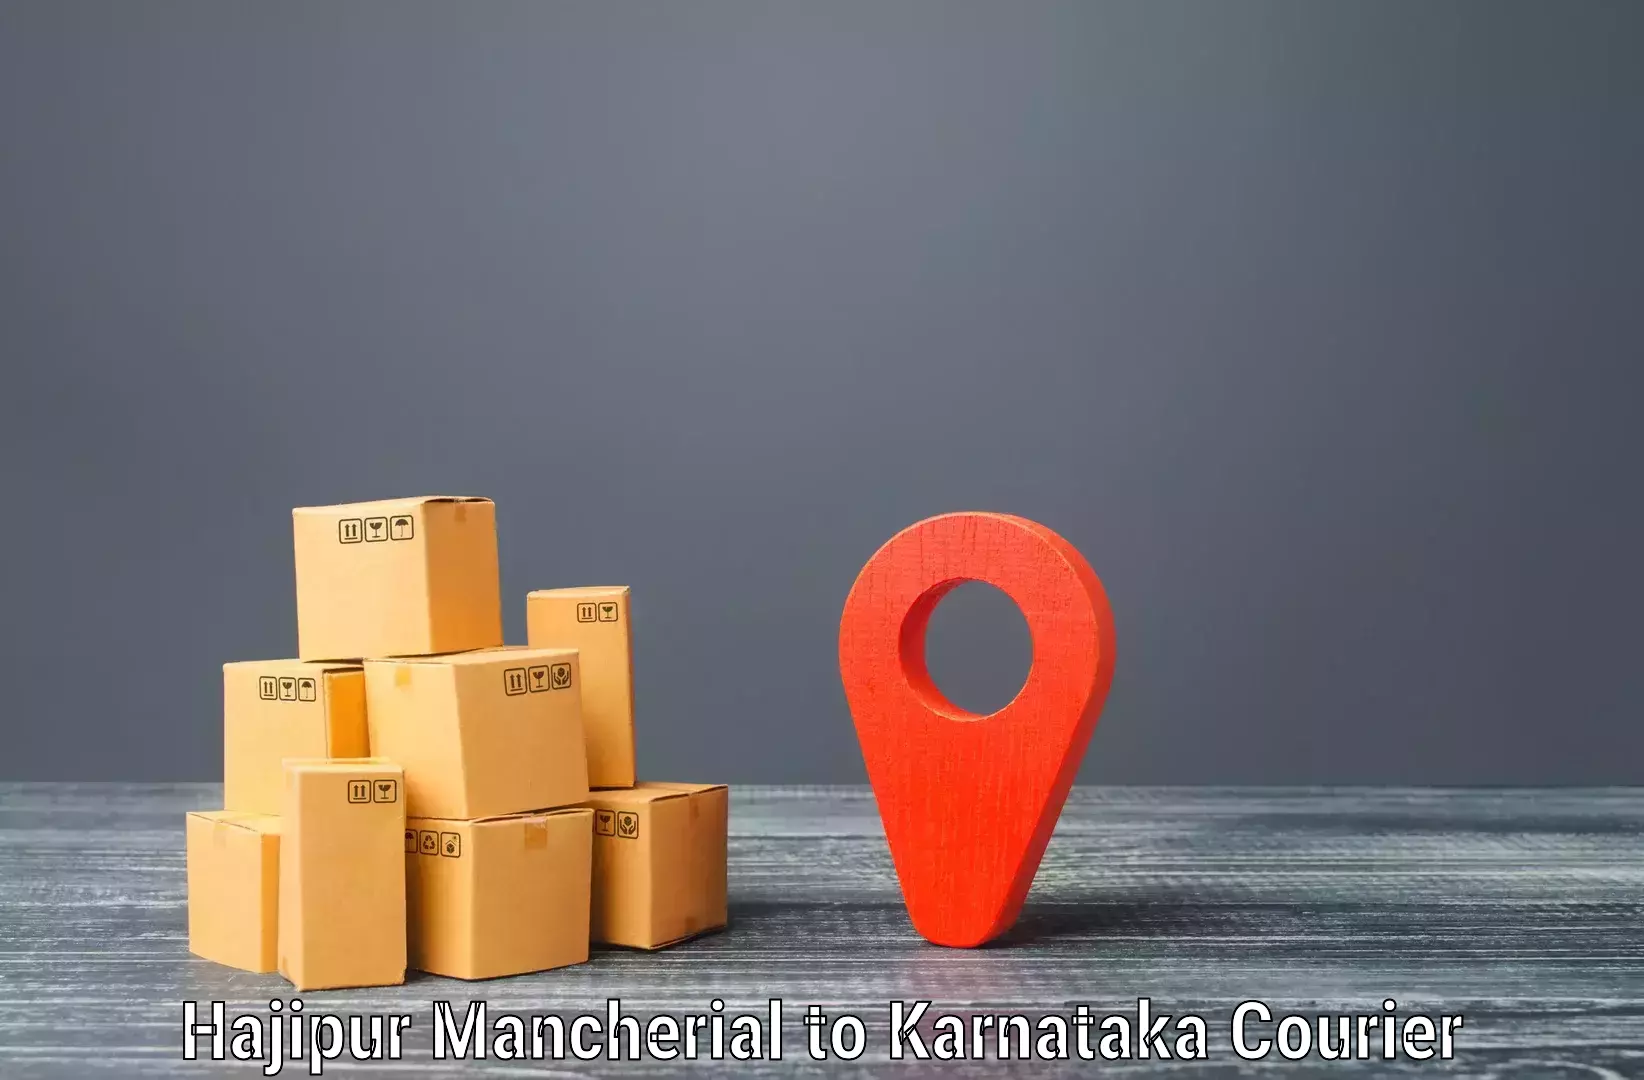 High-quality delivery services Hajipur Mancherial to Mangalore Port